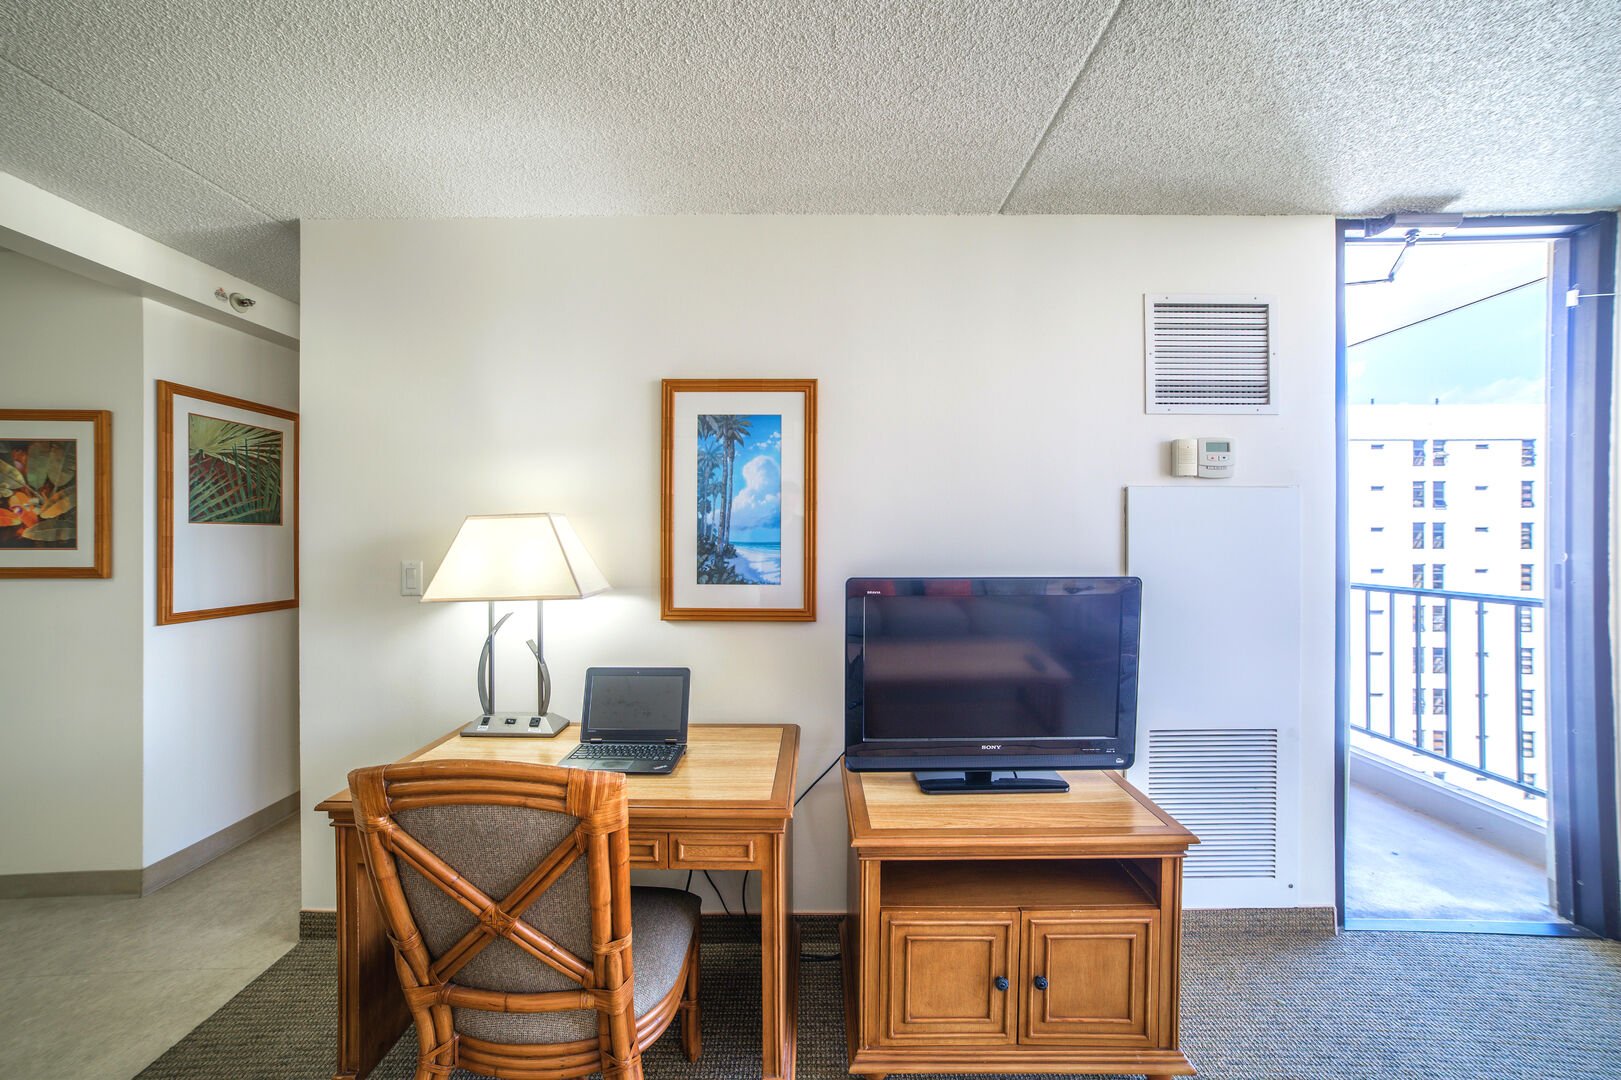 Work from the luxury of your Waikiki condo while on vacation